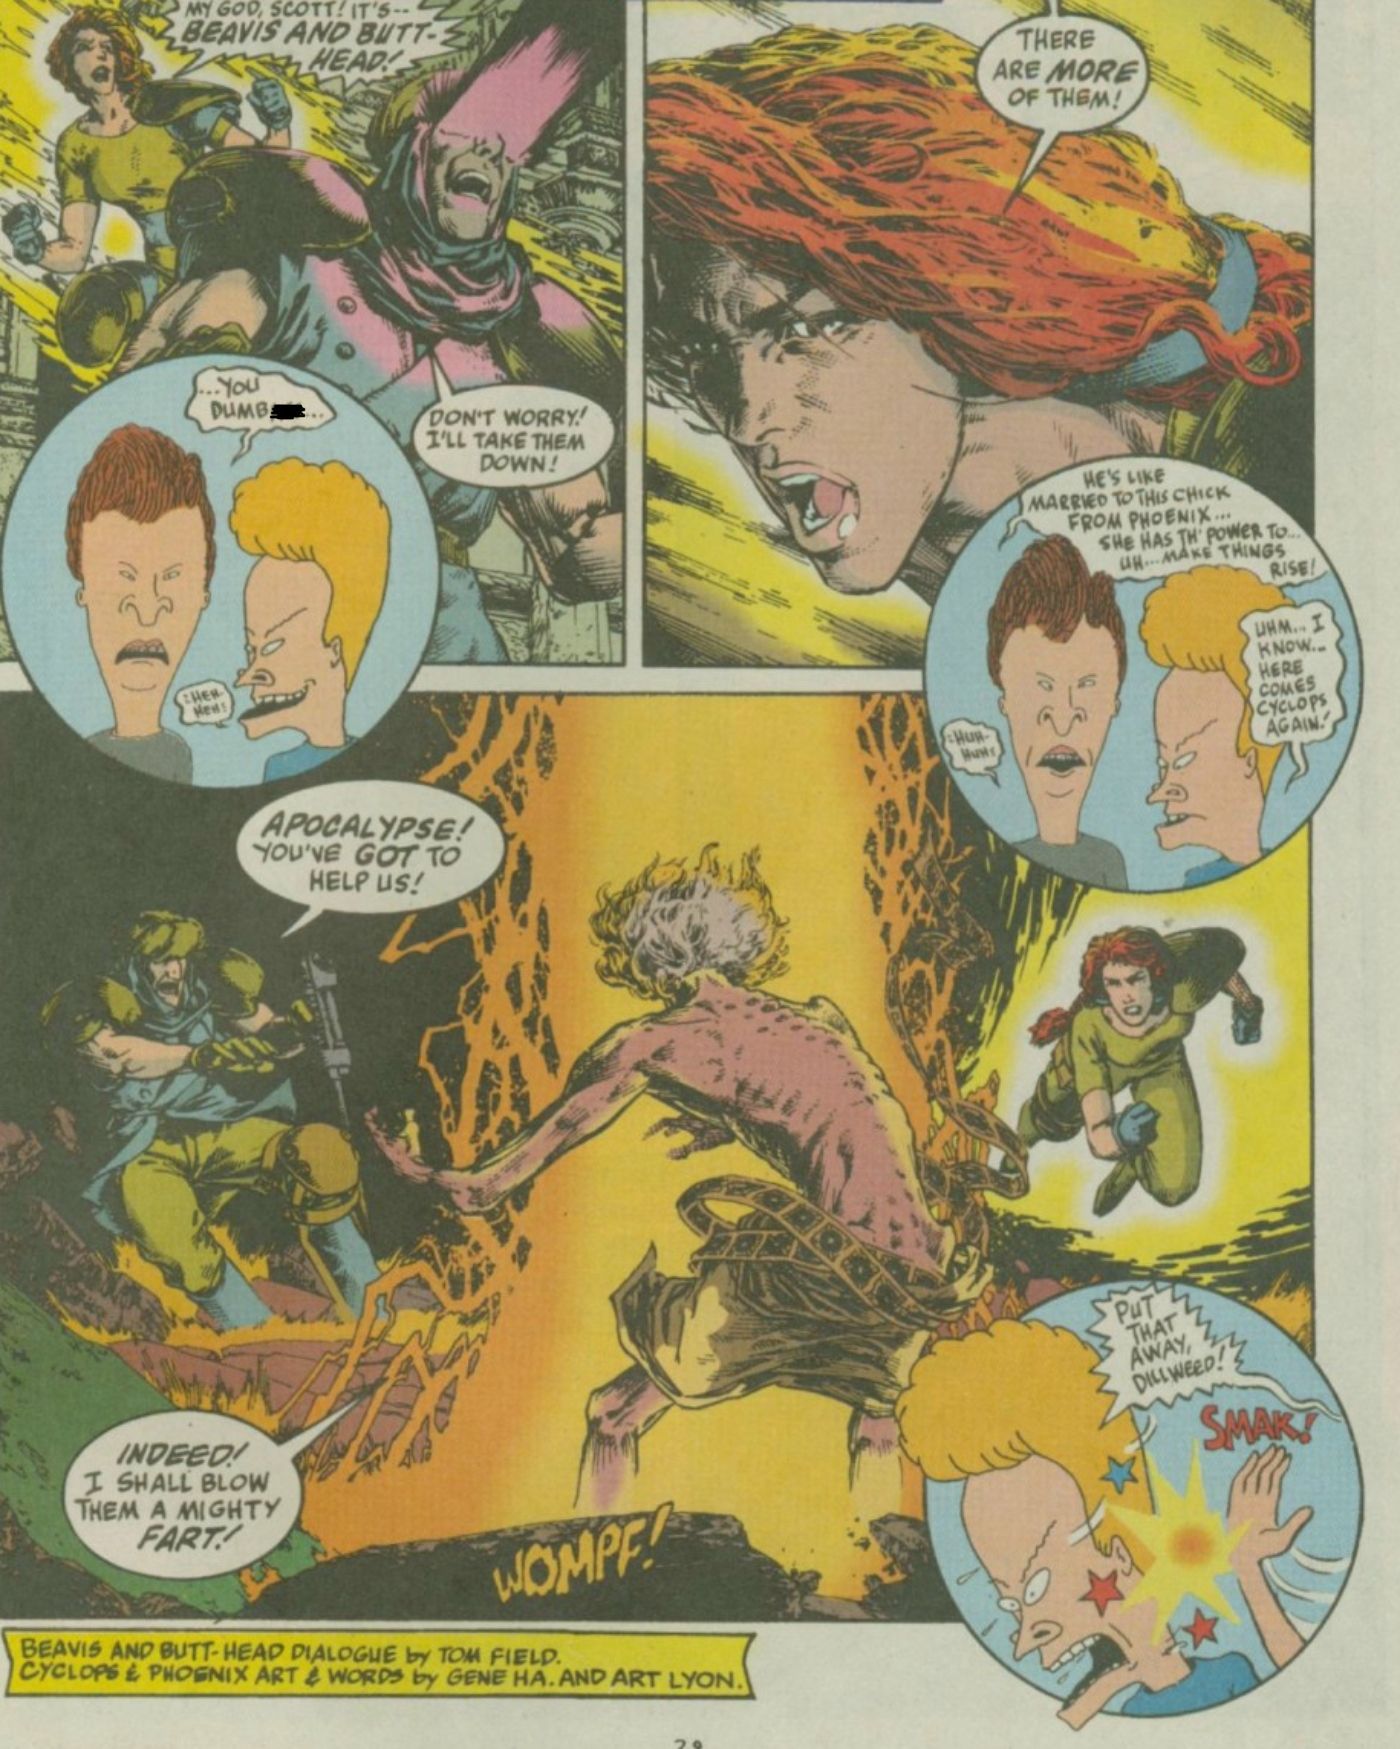 Beavis and Butt-Head getting attacked by the X-Men comic they're reading.